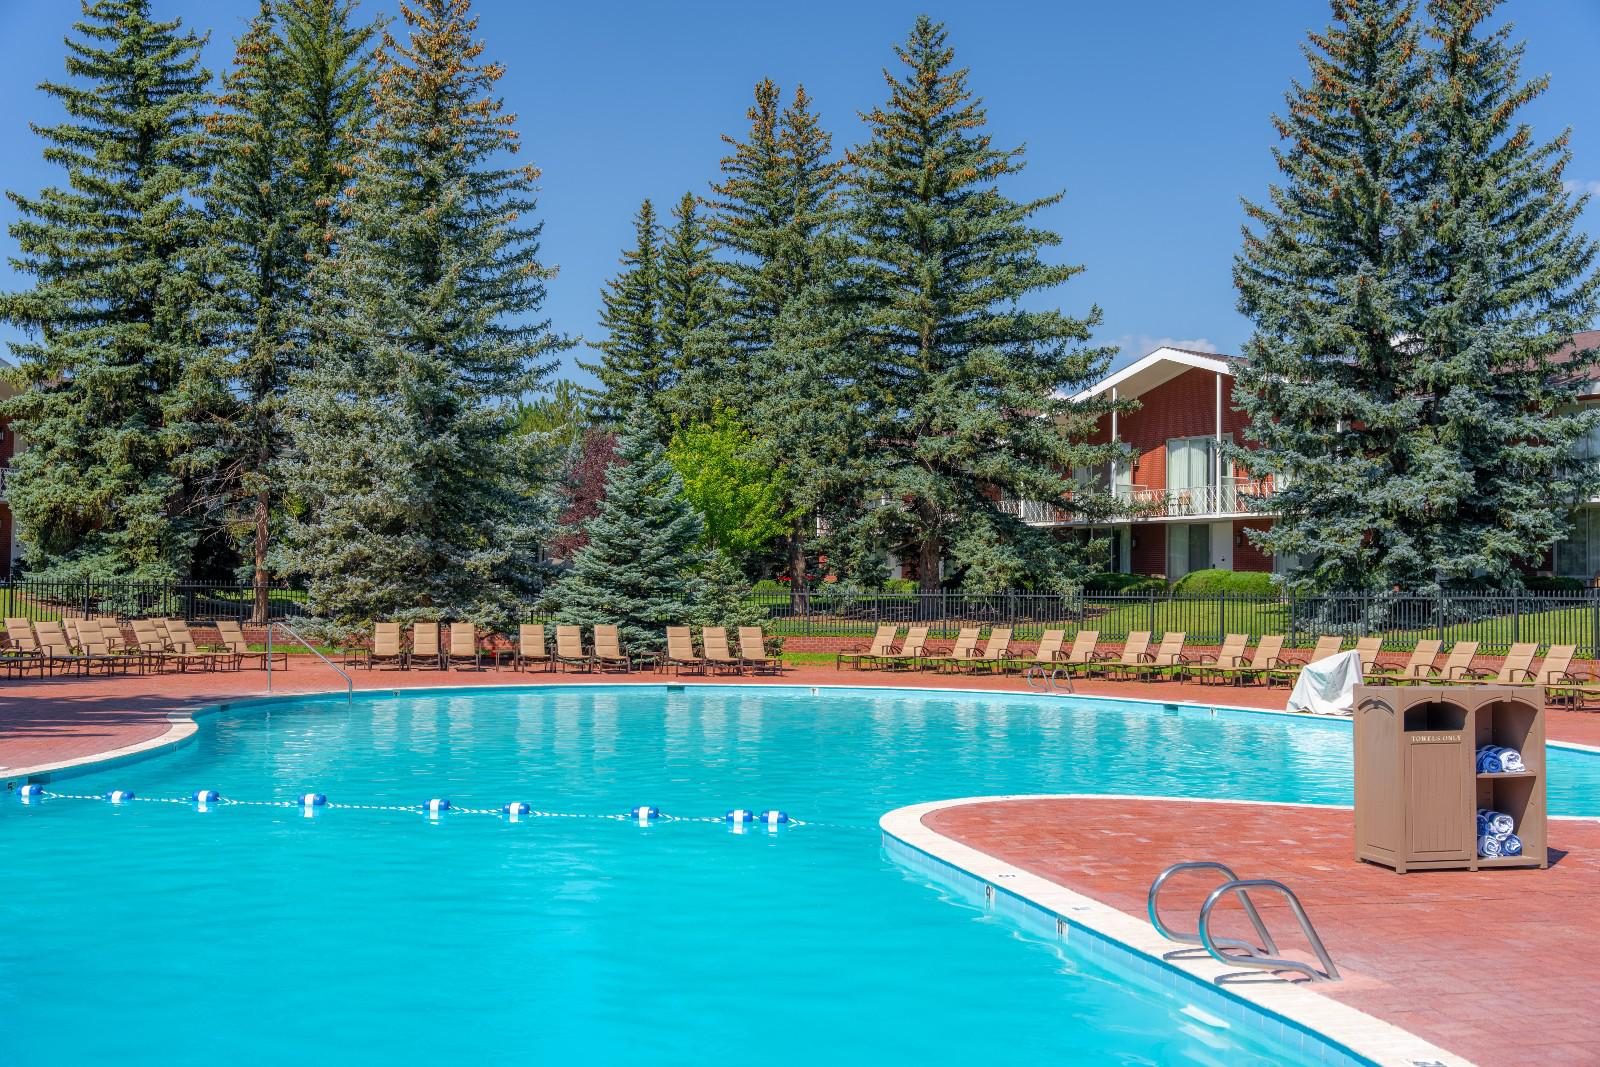 The outdoor seasonal pool at Little America Cheyenne. Little America Hotel & Resort - Cheyenne Cheyenne (307)775-8400